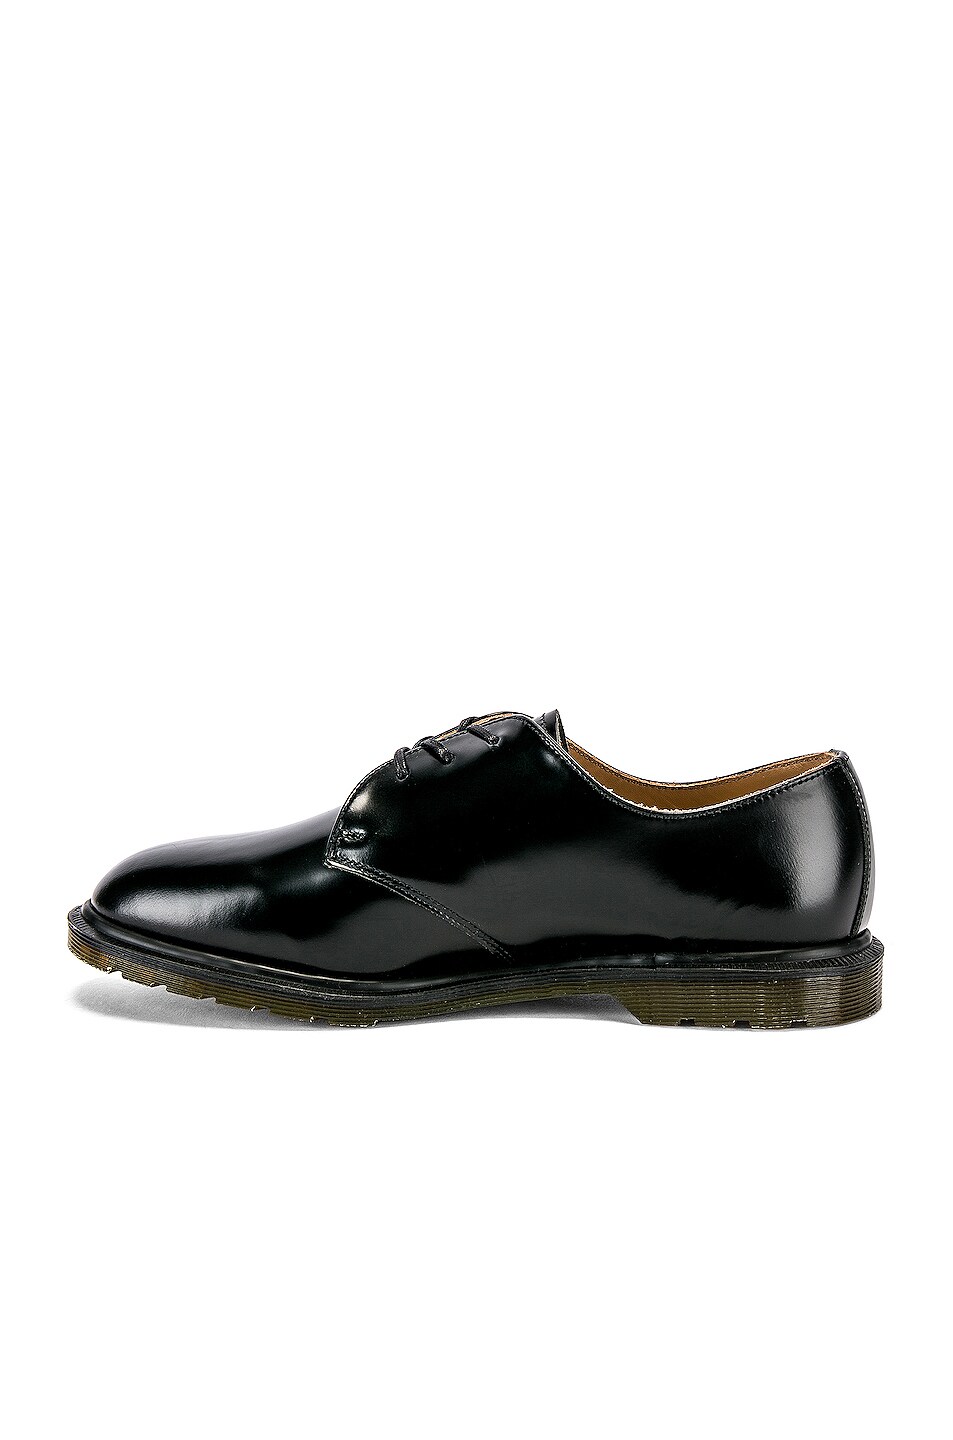 England Archie Classic Shoe in Black 